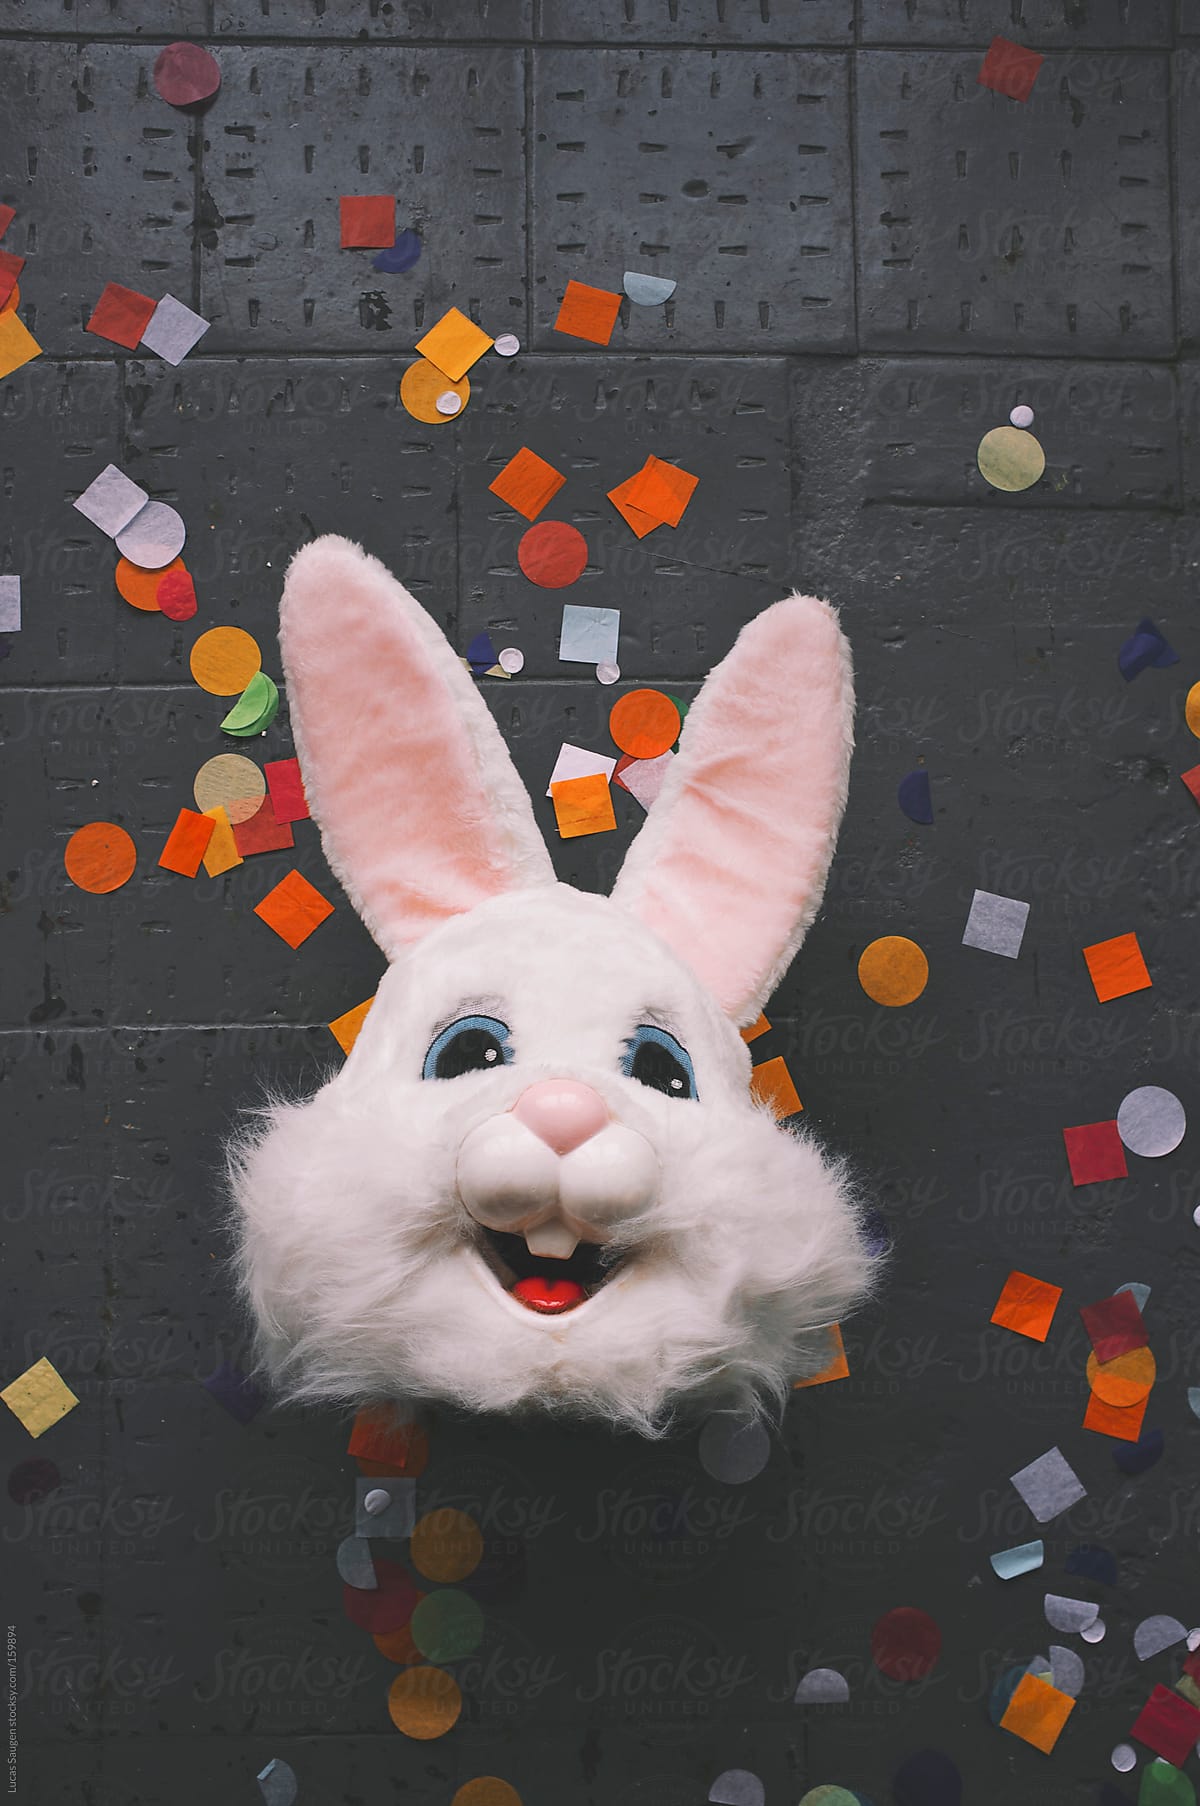 Head to a rabbit costume laying on a concrete floor with colorful confetti.